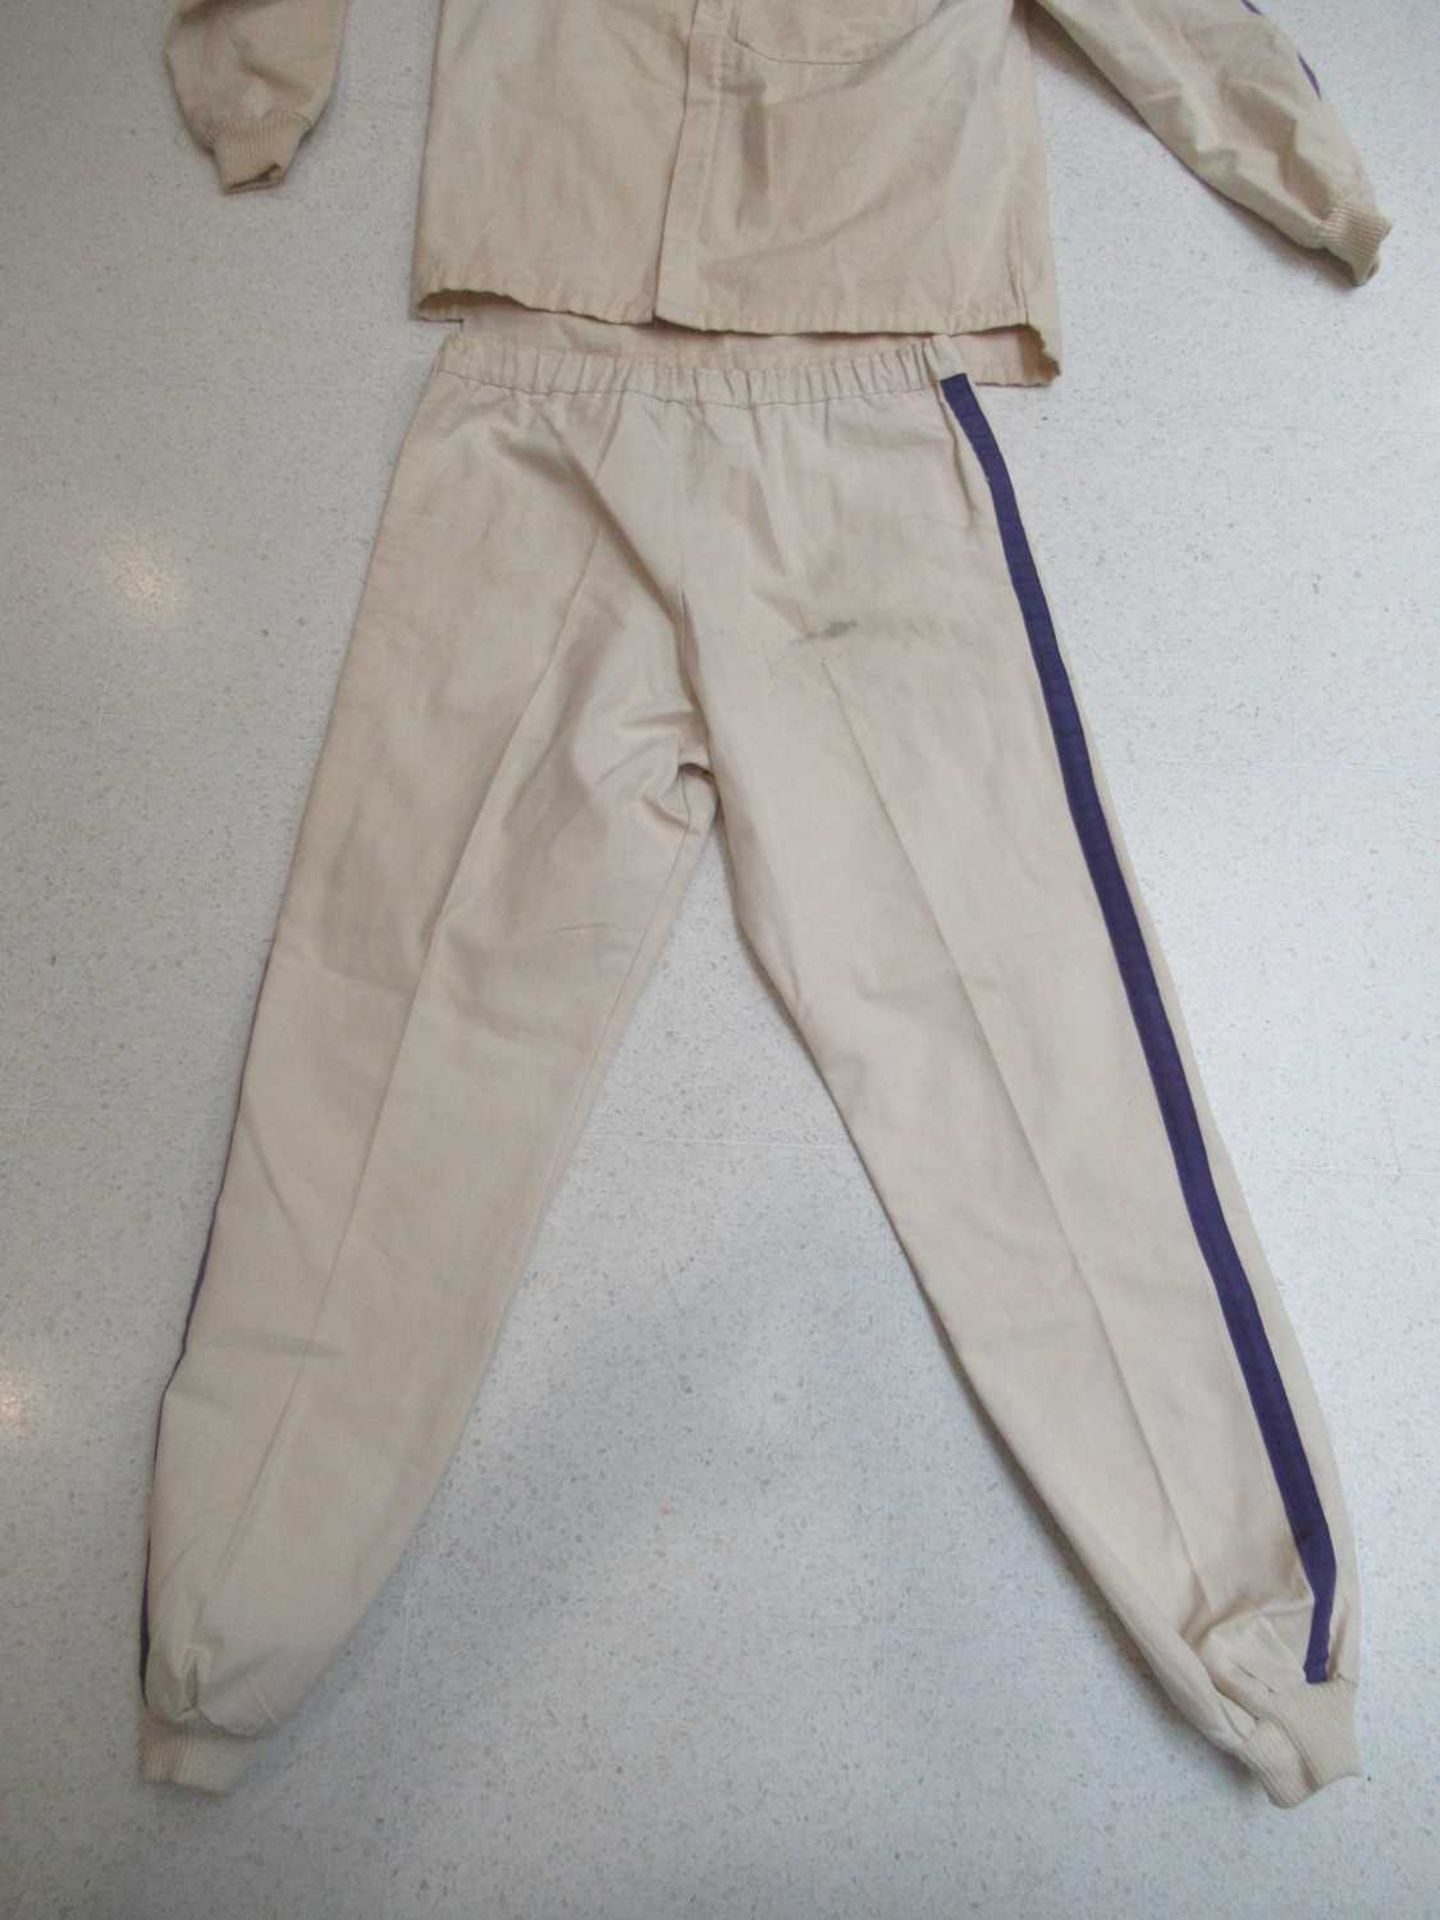 A Nomex Blue and Red Car Racing Suit, 40 inch chest size, and a Nomex Two Piece Green and Purple - Image 5 of 5